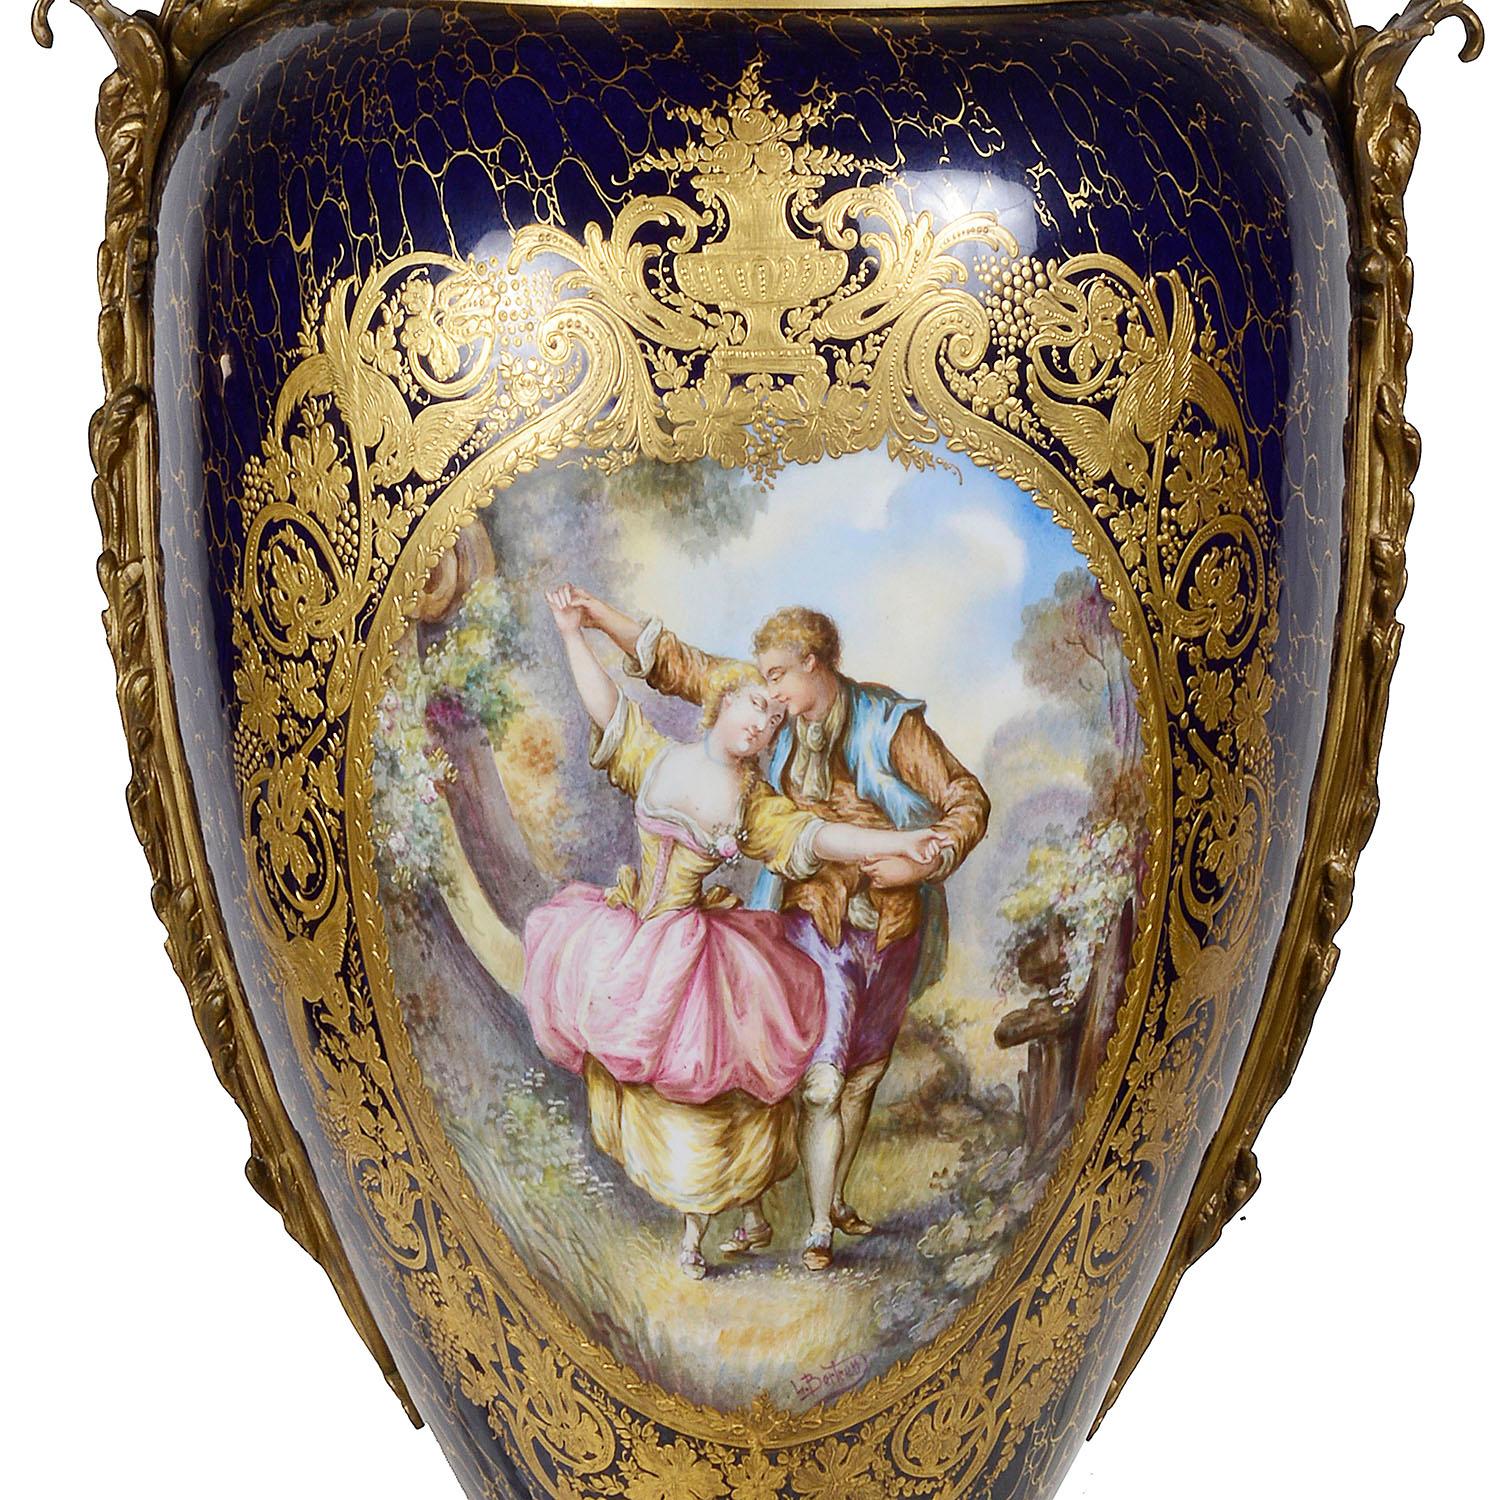 A wonderful quality late 19th century French 'Sevres' style hand painted porcelain lidded vase. Having a cobalt blue ground, classical scrolling gilded decoration, gilded ormolu mounts and handles, inset painted panel depicting a romantic scene of